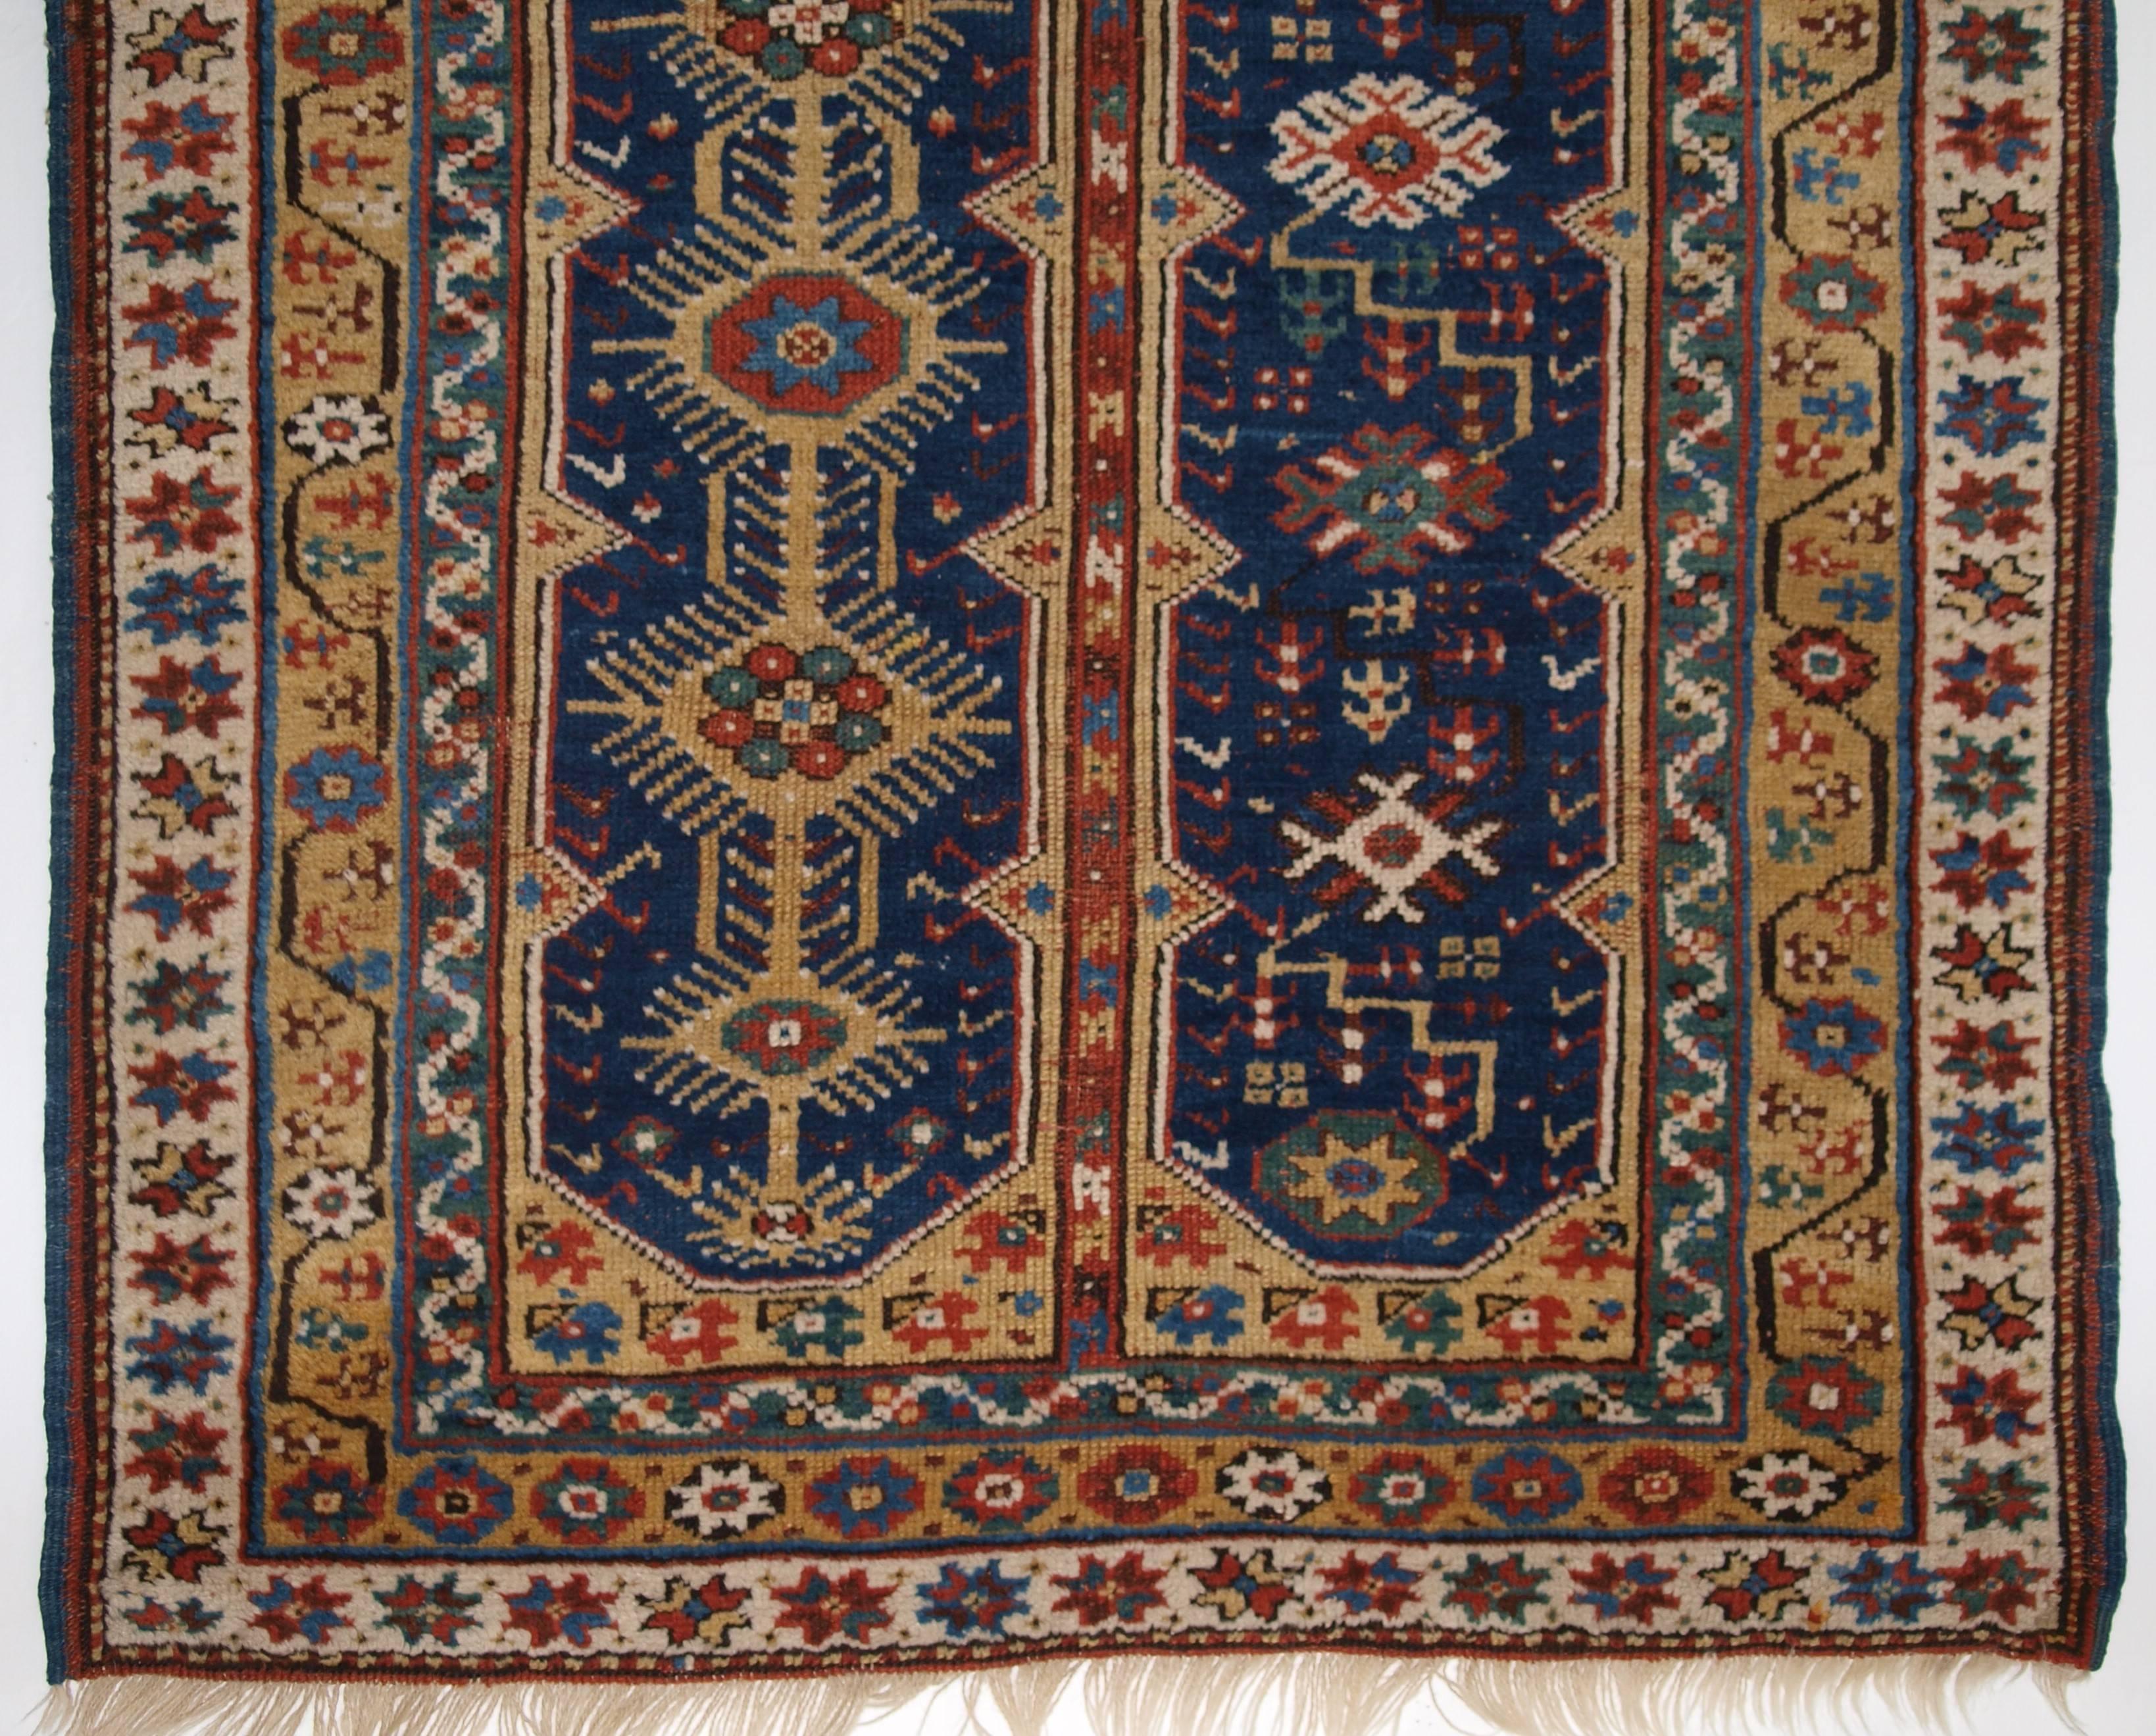 Size: 5ft 11in x 3ft 10in (180 x 117cm).

Antique Turkish Megri prayer rug of classic design with superb yellow field. 

Mid-19th century.

The rug has very soft wool and a very floppy handle. The rug is beautifully drawn with superb colours